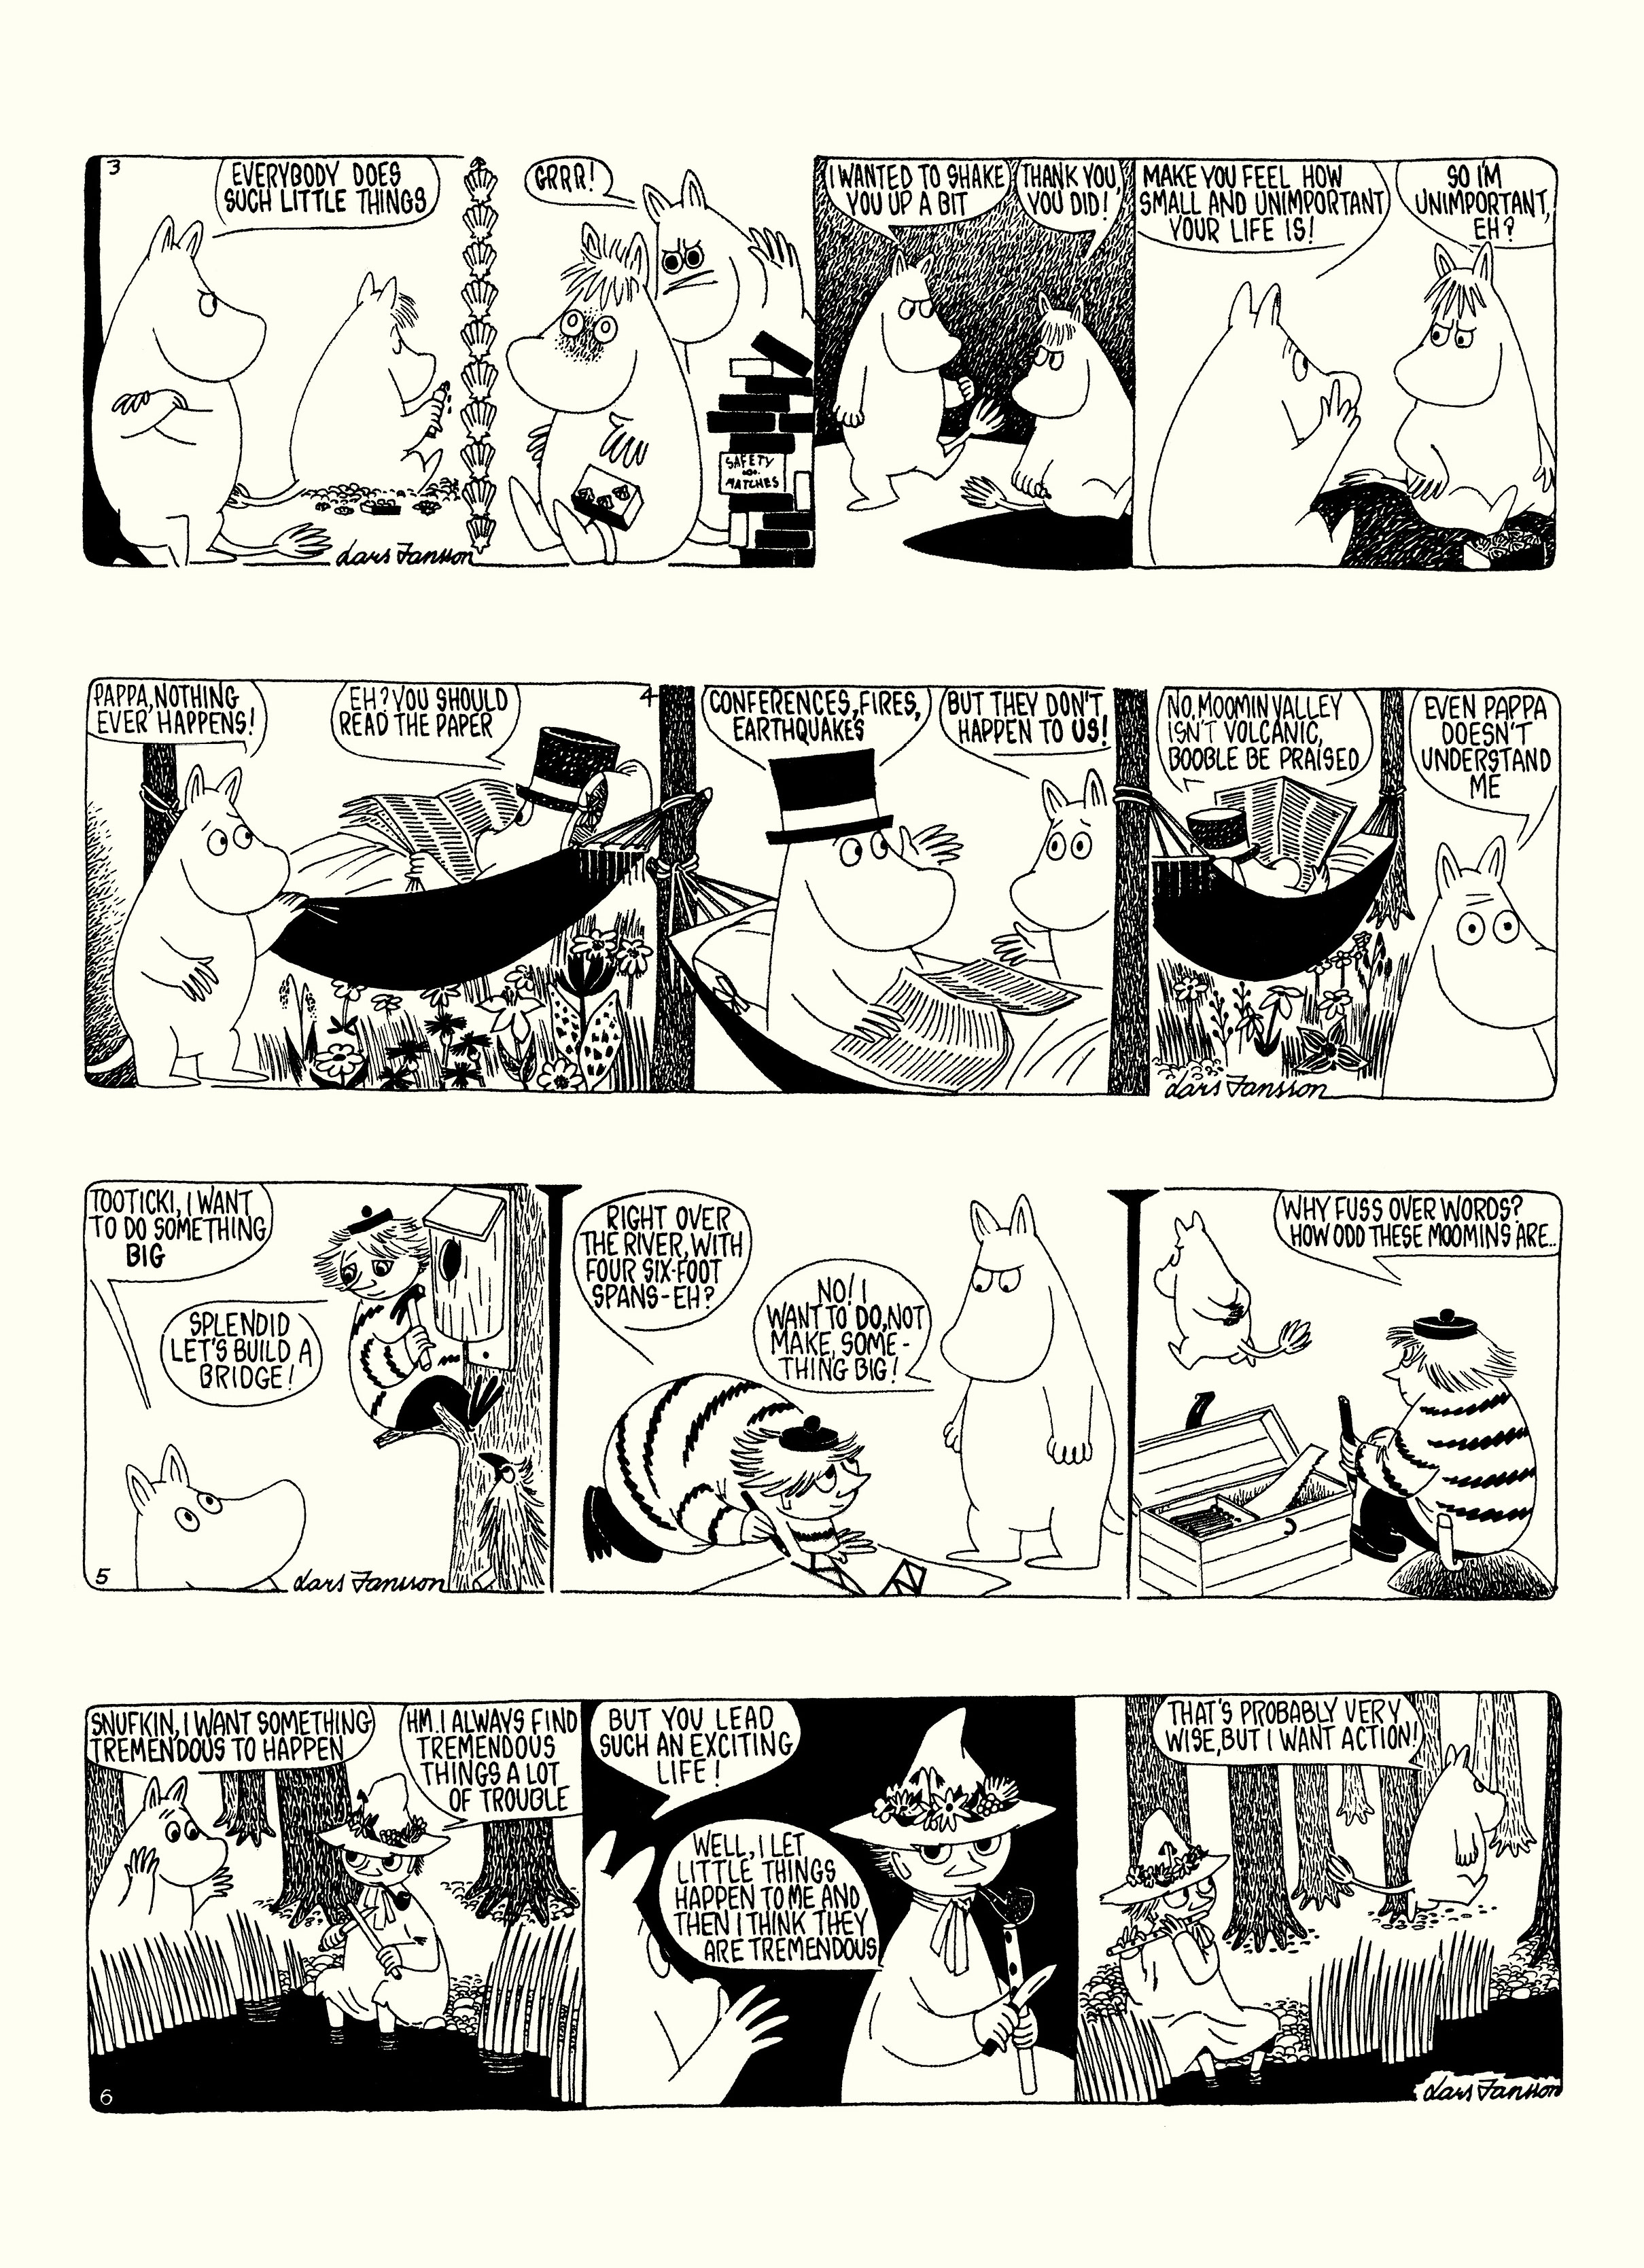 Read online Moomin: The Complete Lars Jansson Comic Strip comic -  Issue # TPB 8 - 6